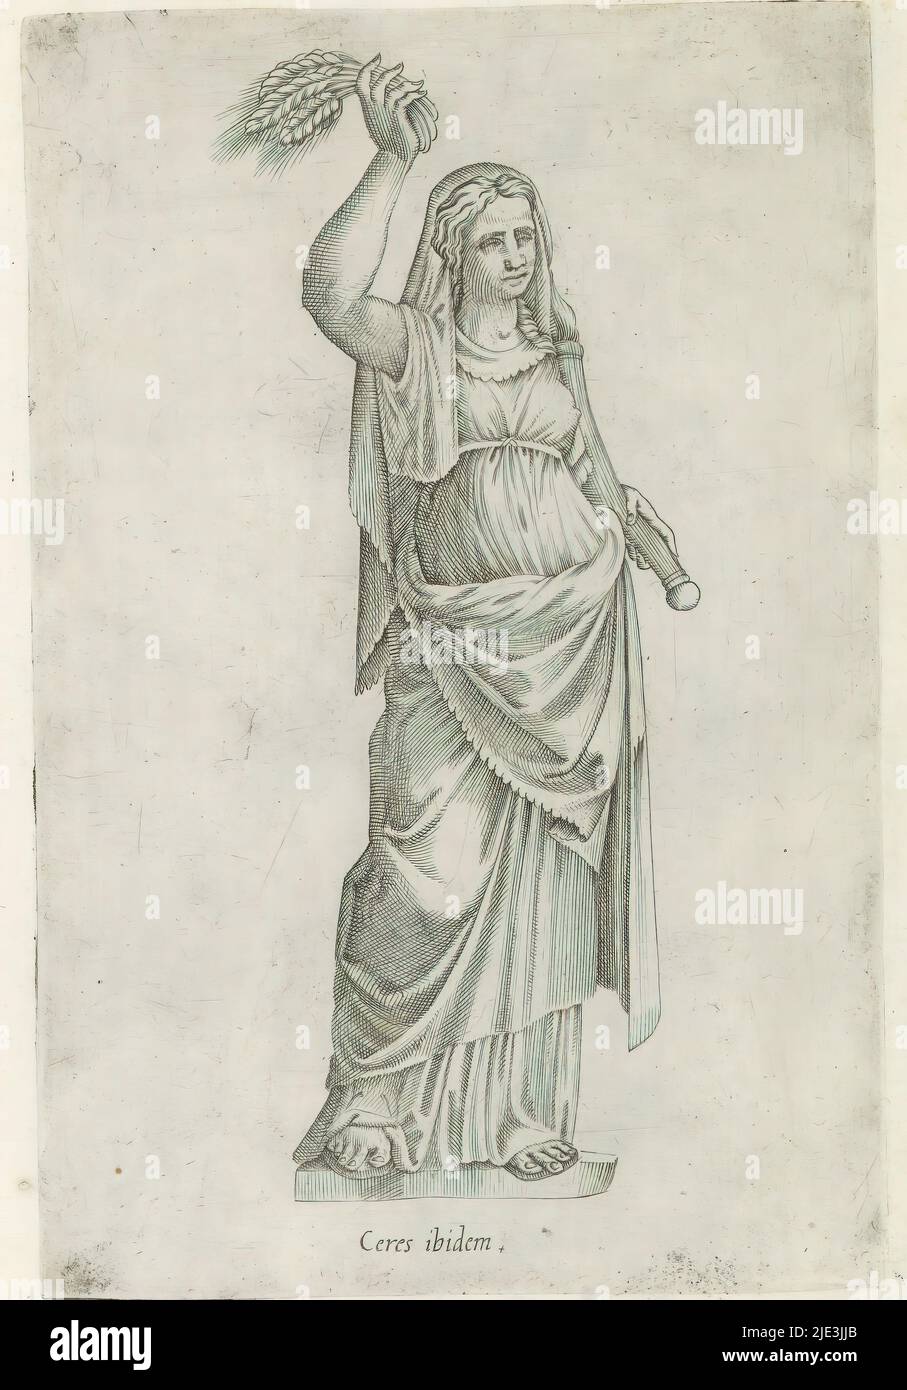 Sculpture of Ceres, Sculptures of Antiquity (series title), Caption in Latin. Print is part of an album., print maker: anonymous, Italy, 1600 - 1699, paper, engraving, height 201 mm × width 132 mm Stock Photo